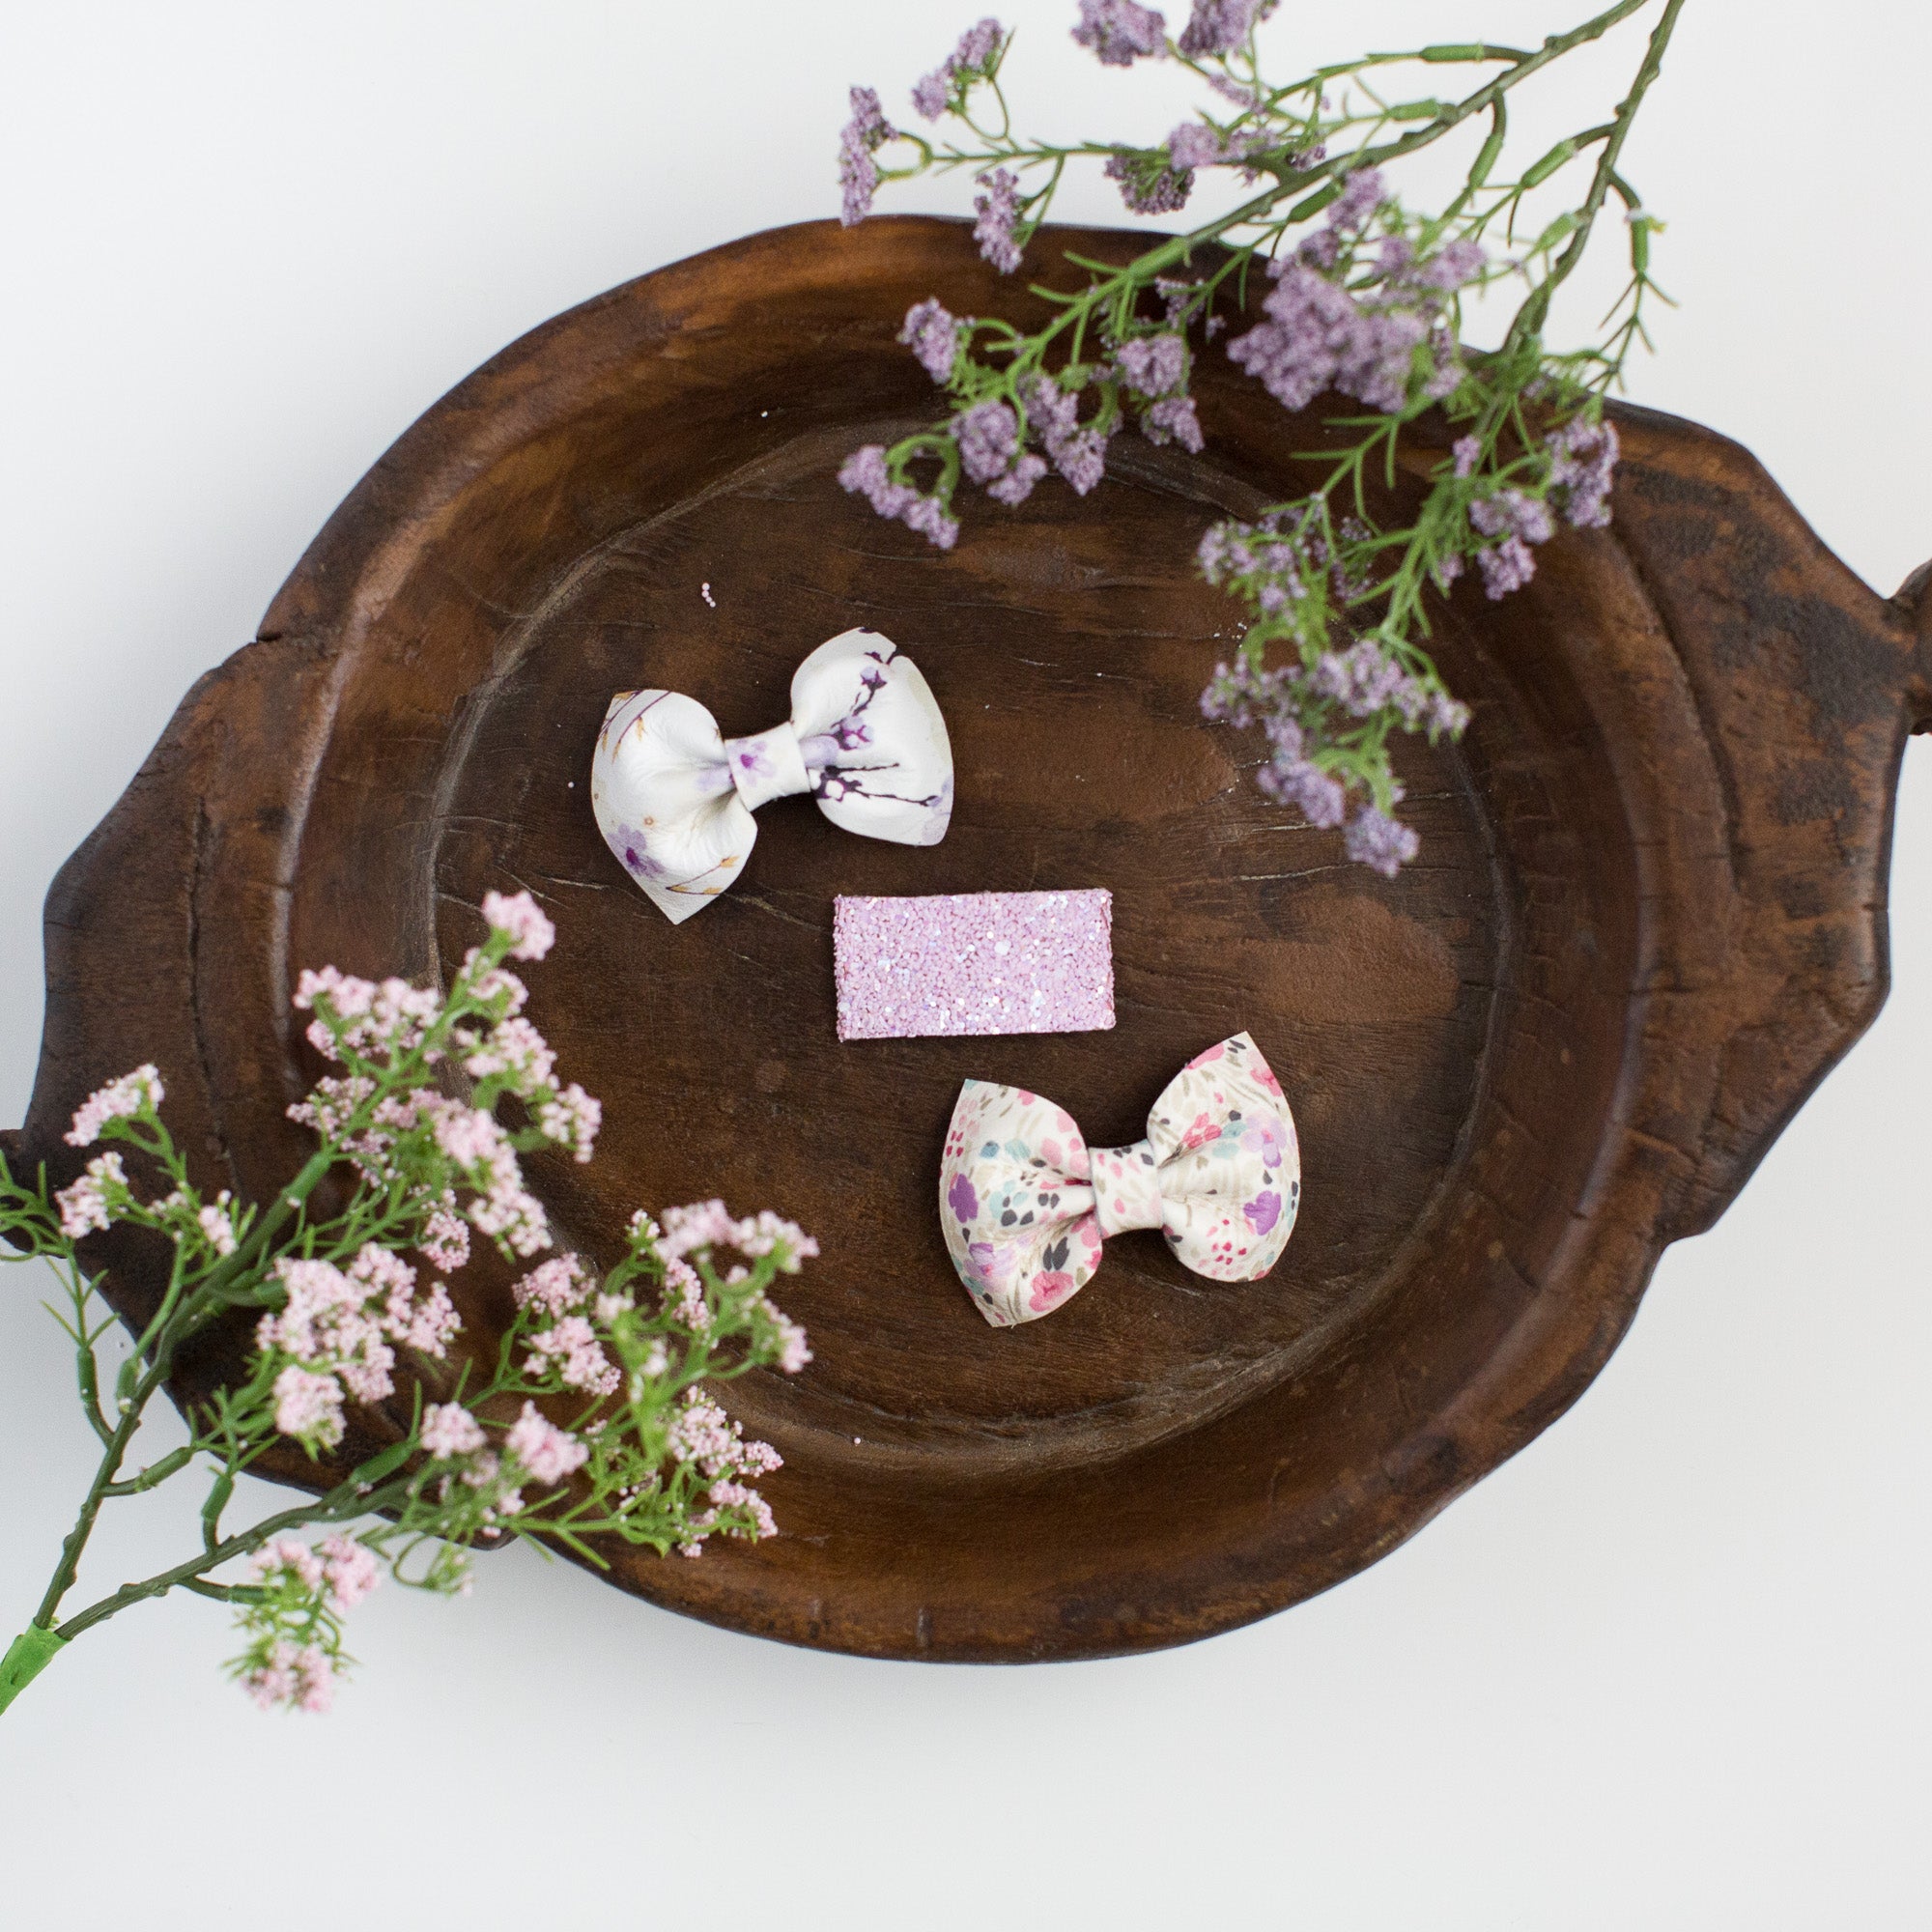 Blooms Leather Bow